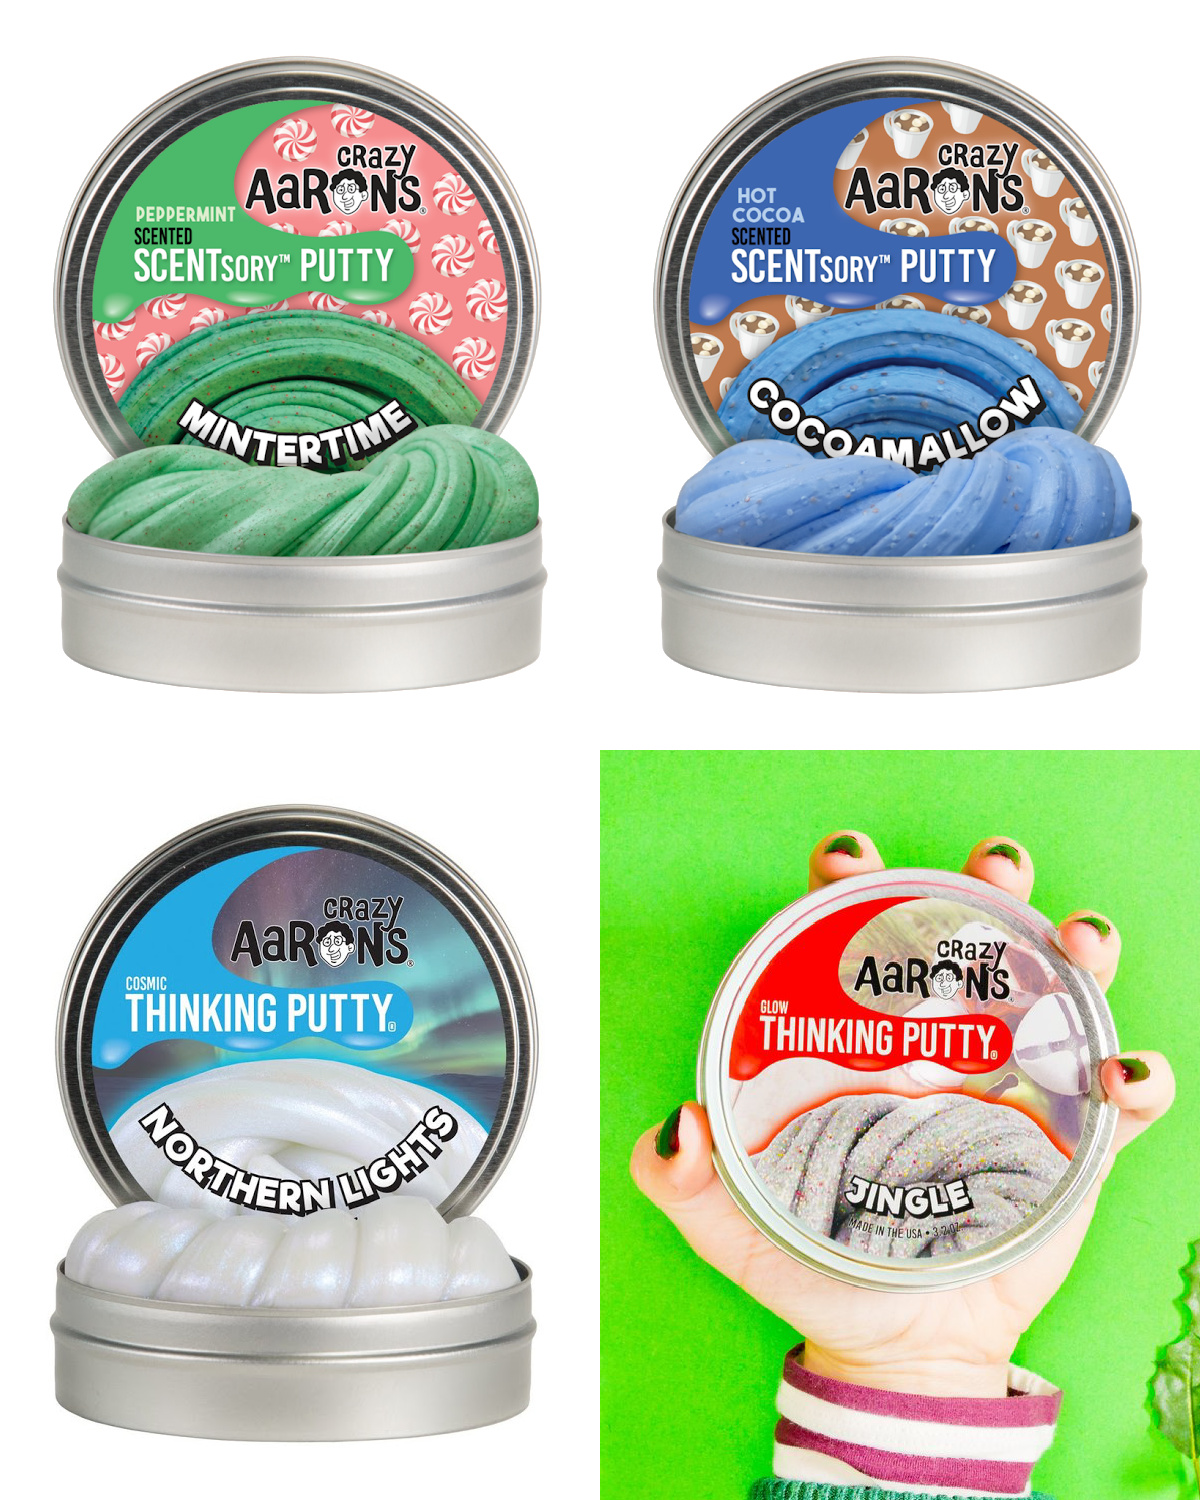 Our 10 best gifts for tweens from small businesses: Crazy Aarons new holiday Thinking Putty tins | Small Business Holiday Gift Guide